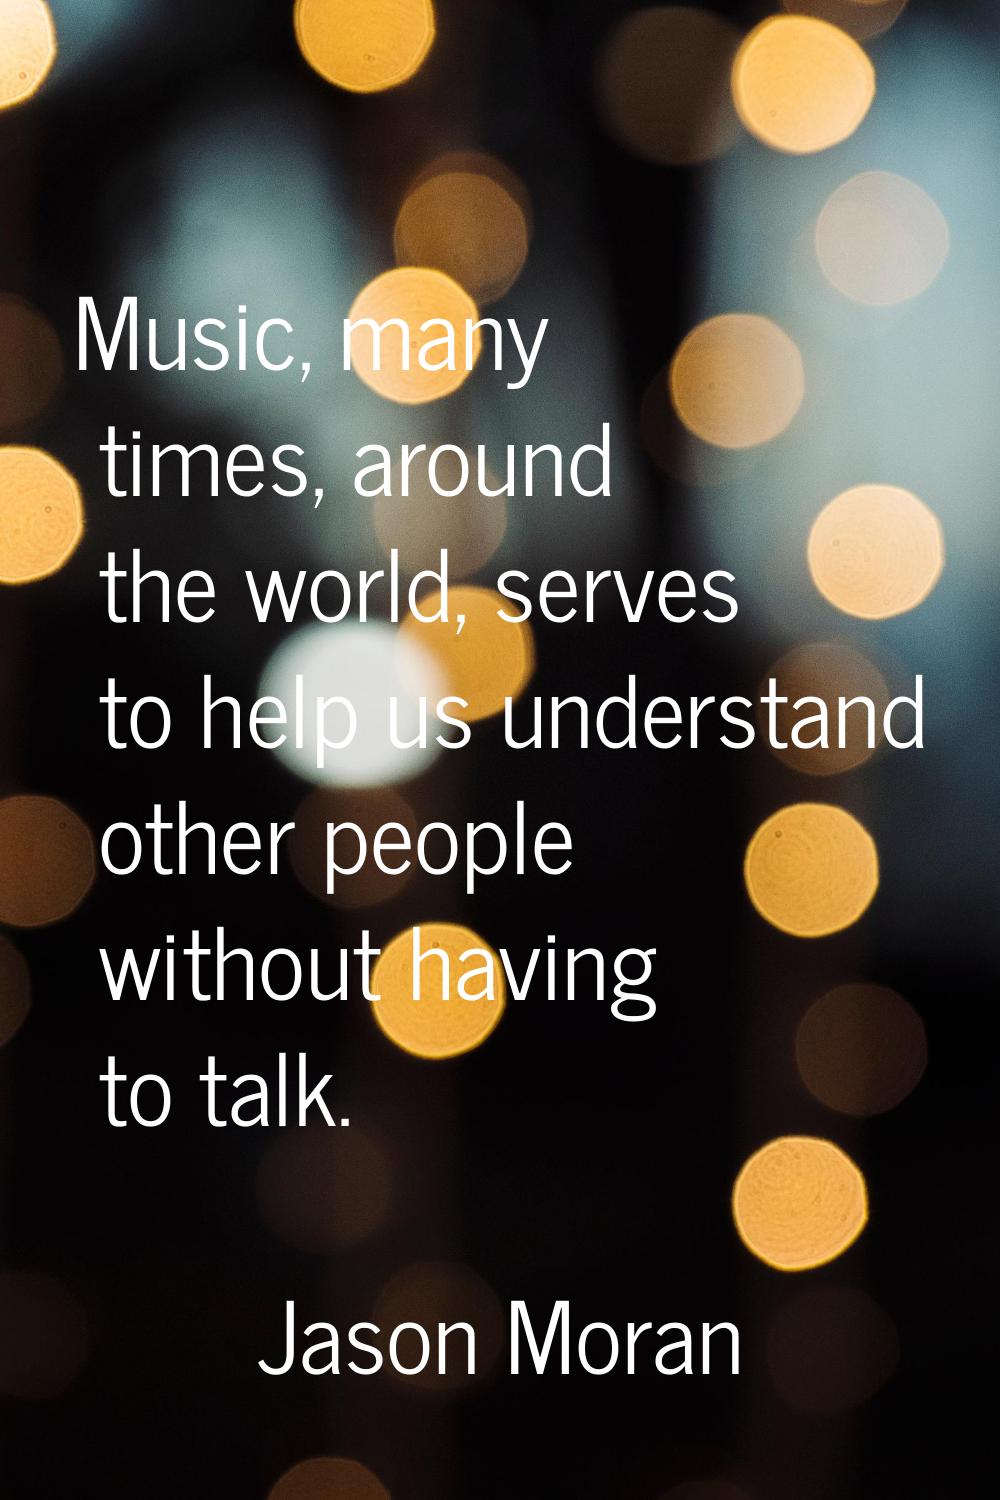 Music, many times, around the world, serves to help us understand other people without having to ta